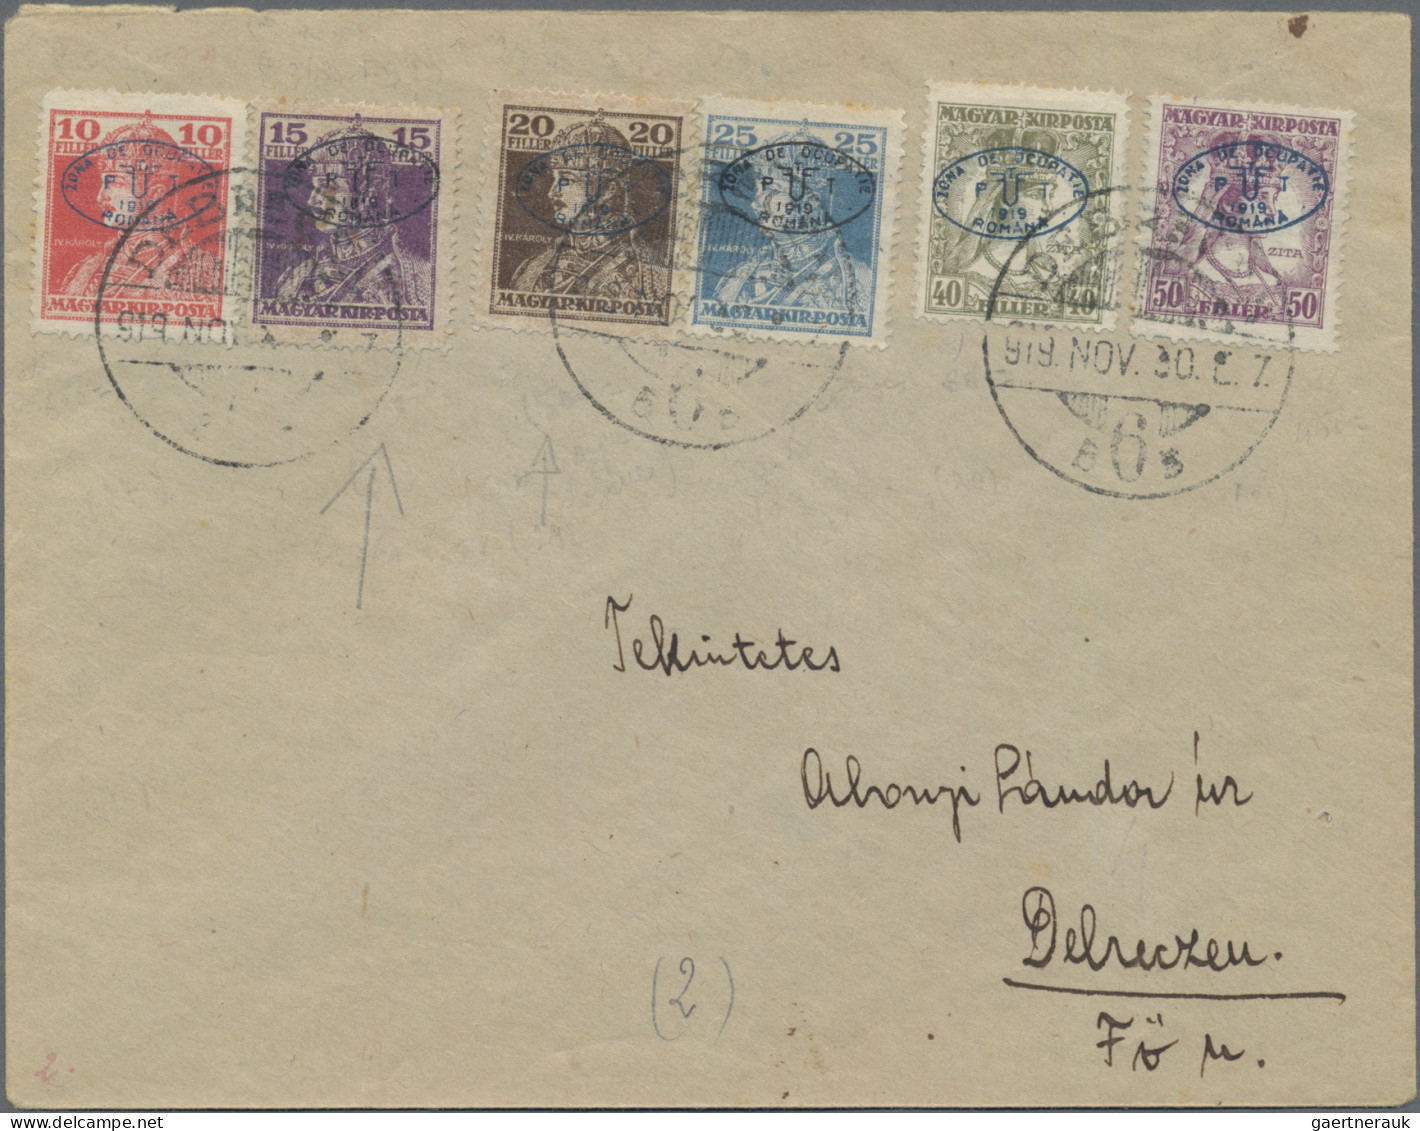 Hungary: 1919, set of six envelopes, locally addressed, each with multiple stamp